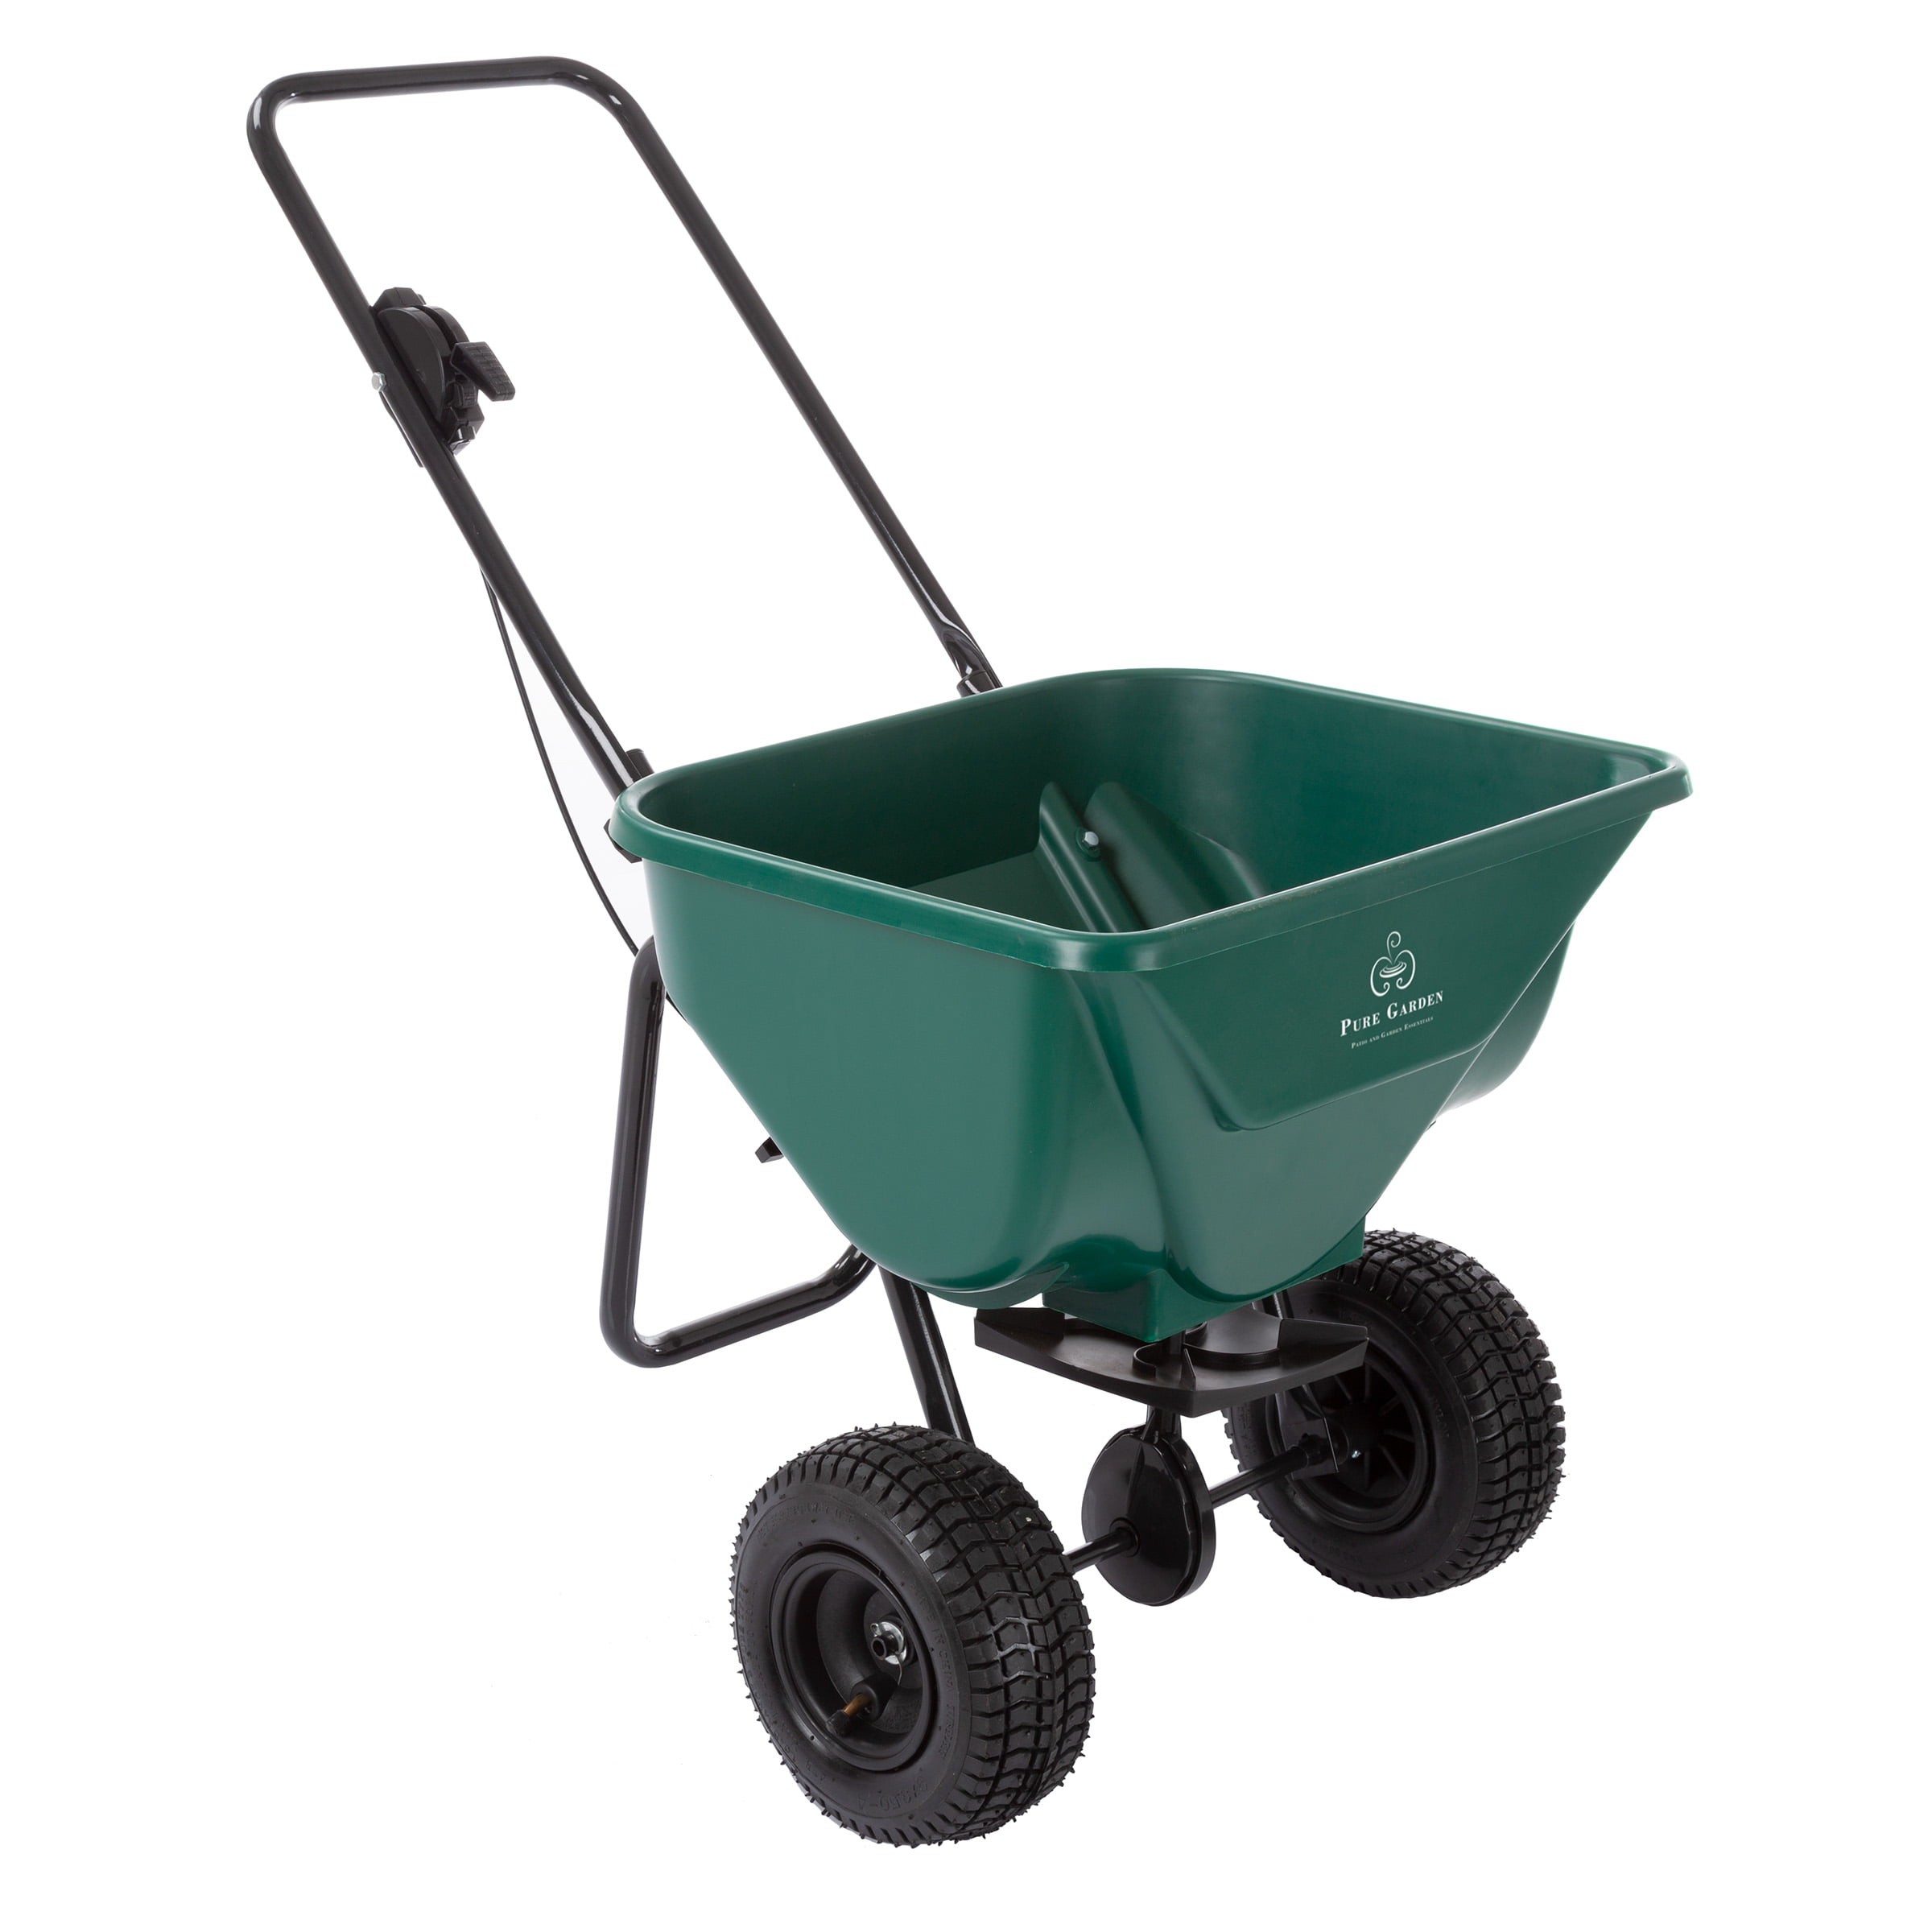 27 Litre Capacity Lawn Rotary Broadcast Spreader for Feed Fertilizer Seed and Sand